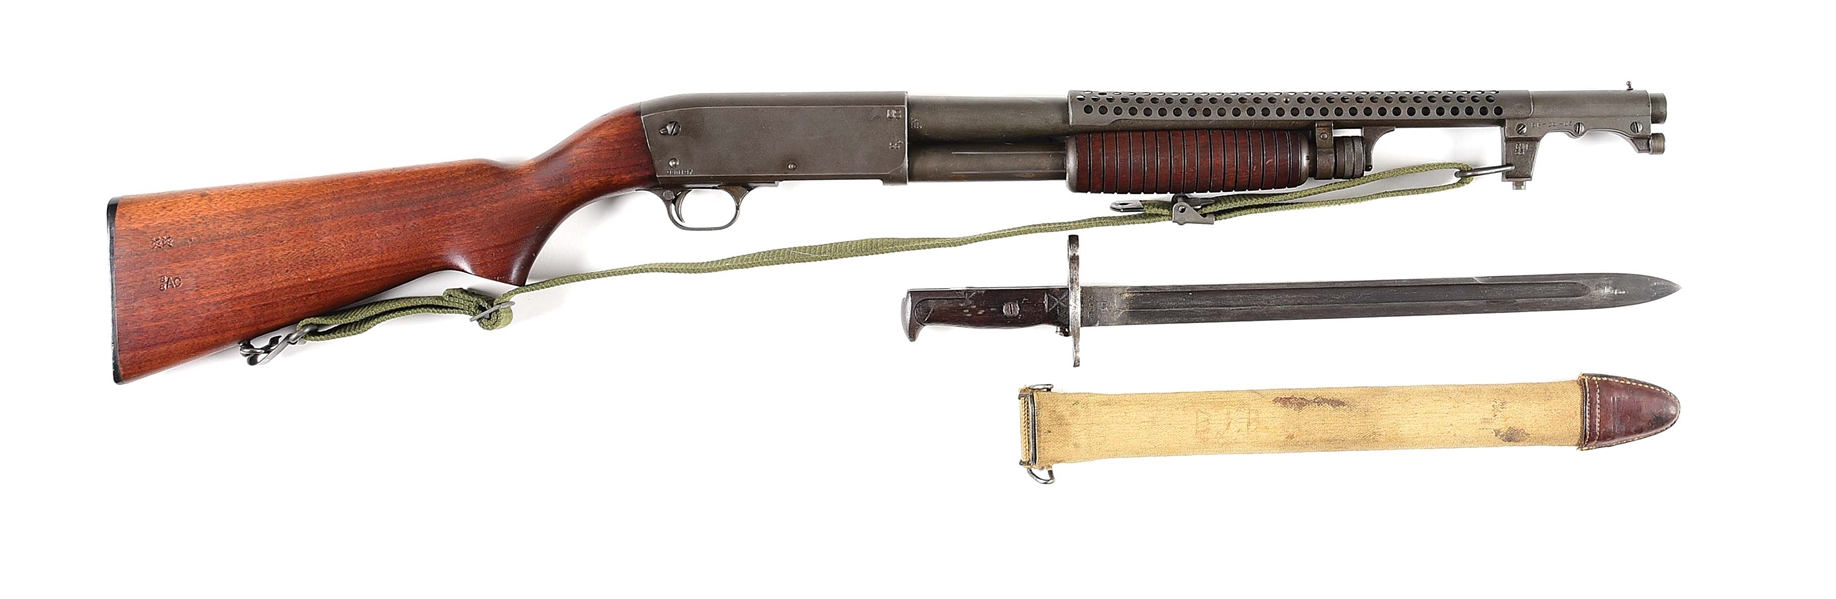 (C) ITHACA 37 TRENCH STYLE SLIDE ACTION SHOTGUN WITH BAYONET.